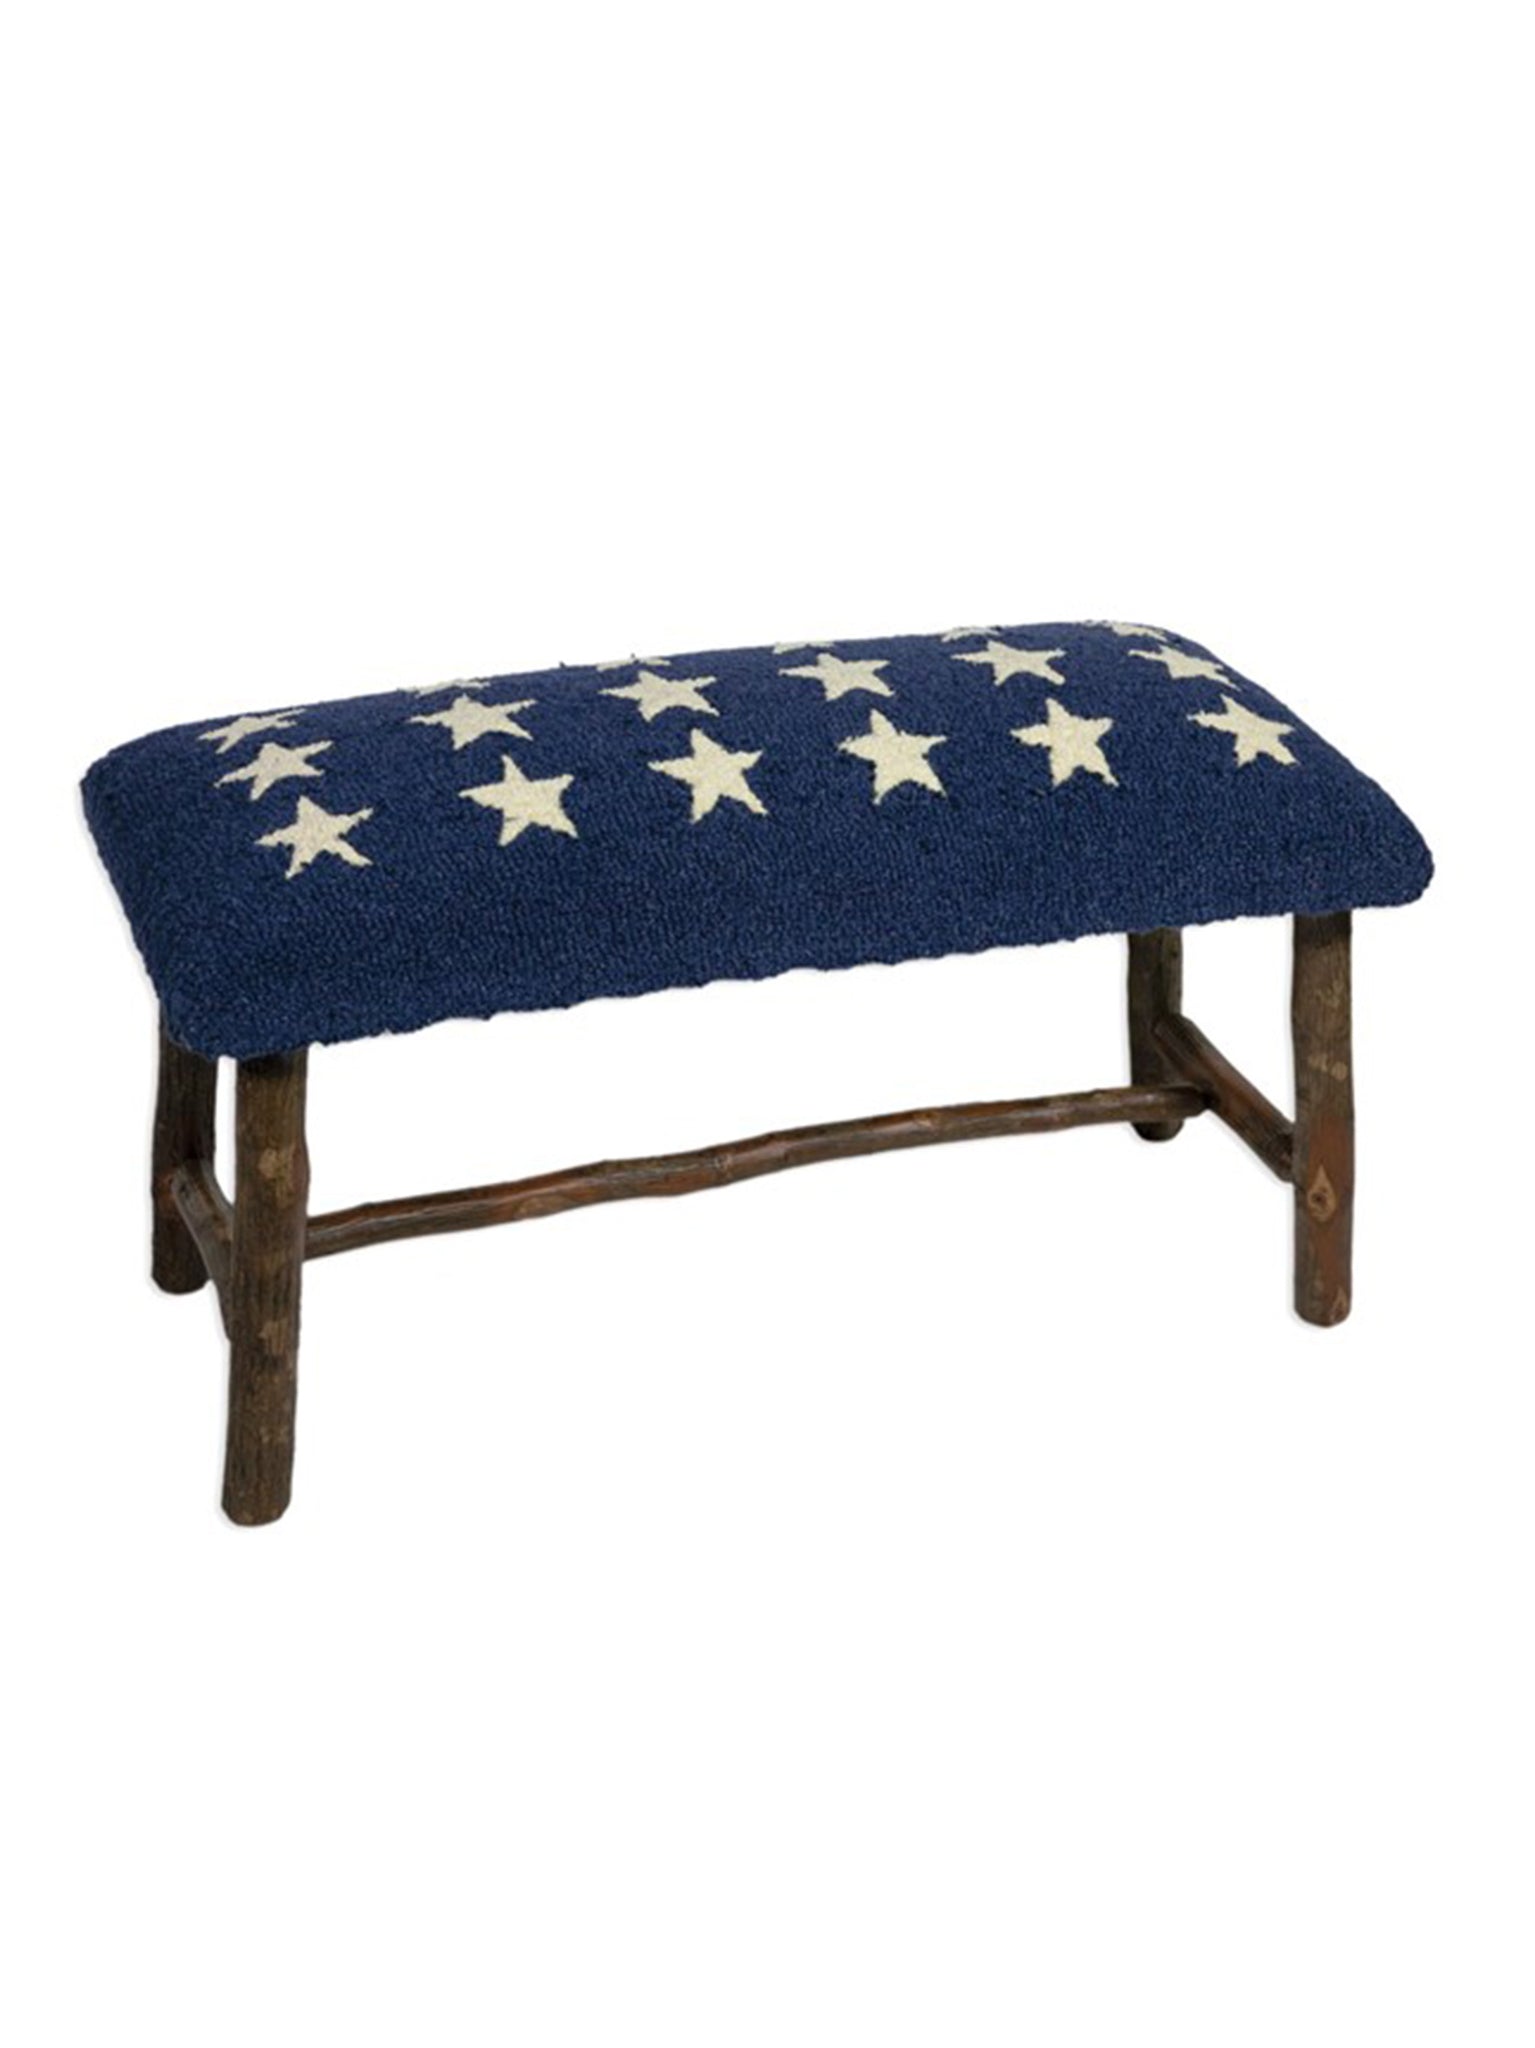 Blue Stars Hooked Wool Top Bench Weston Table